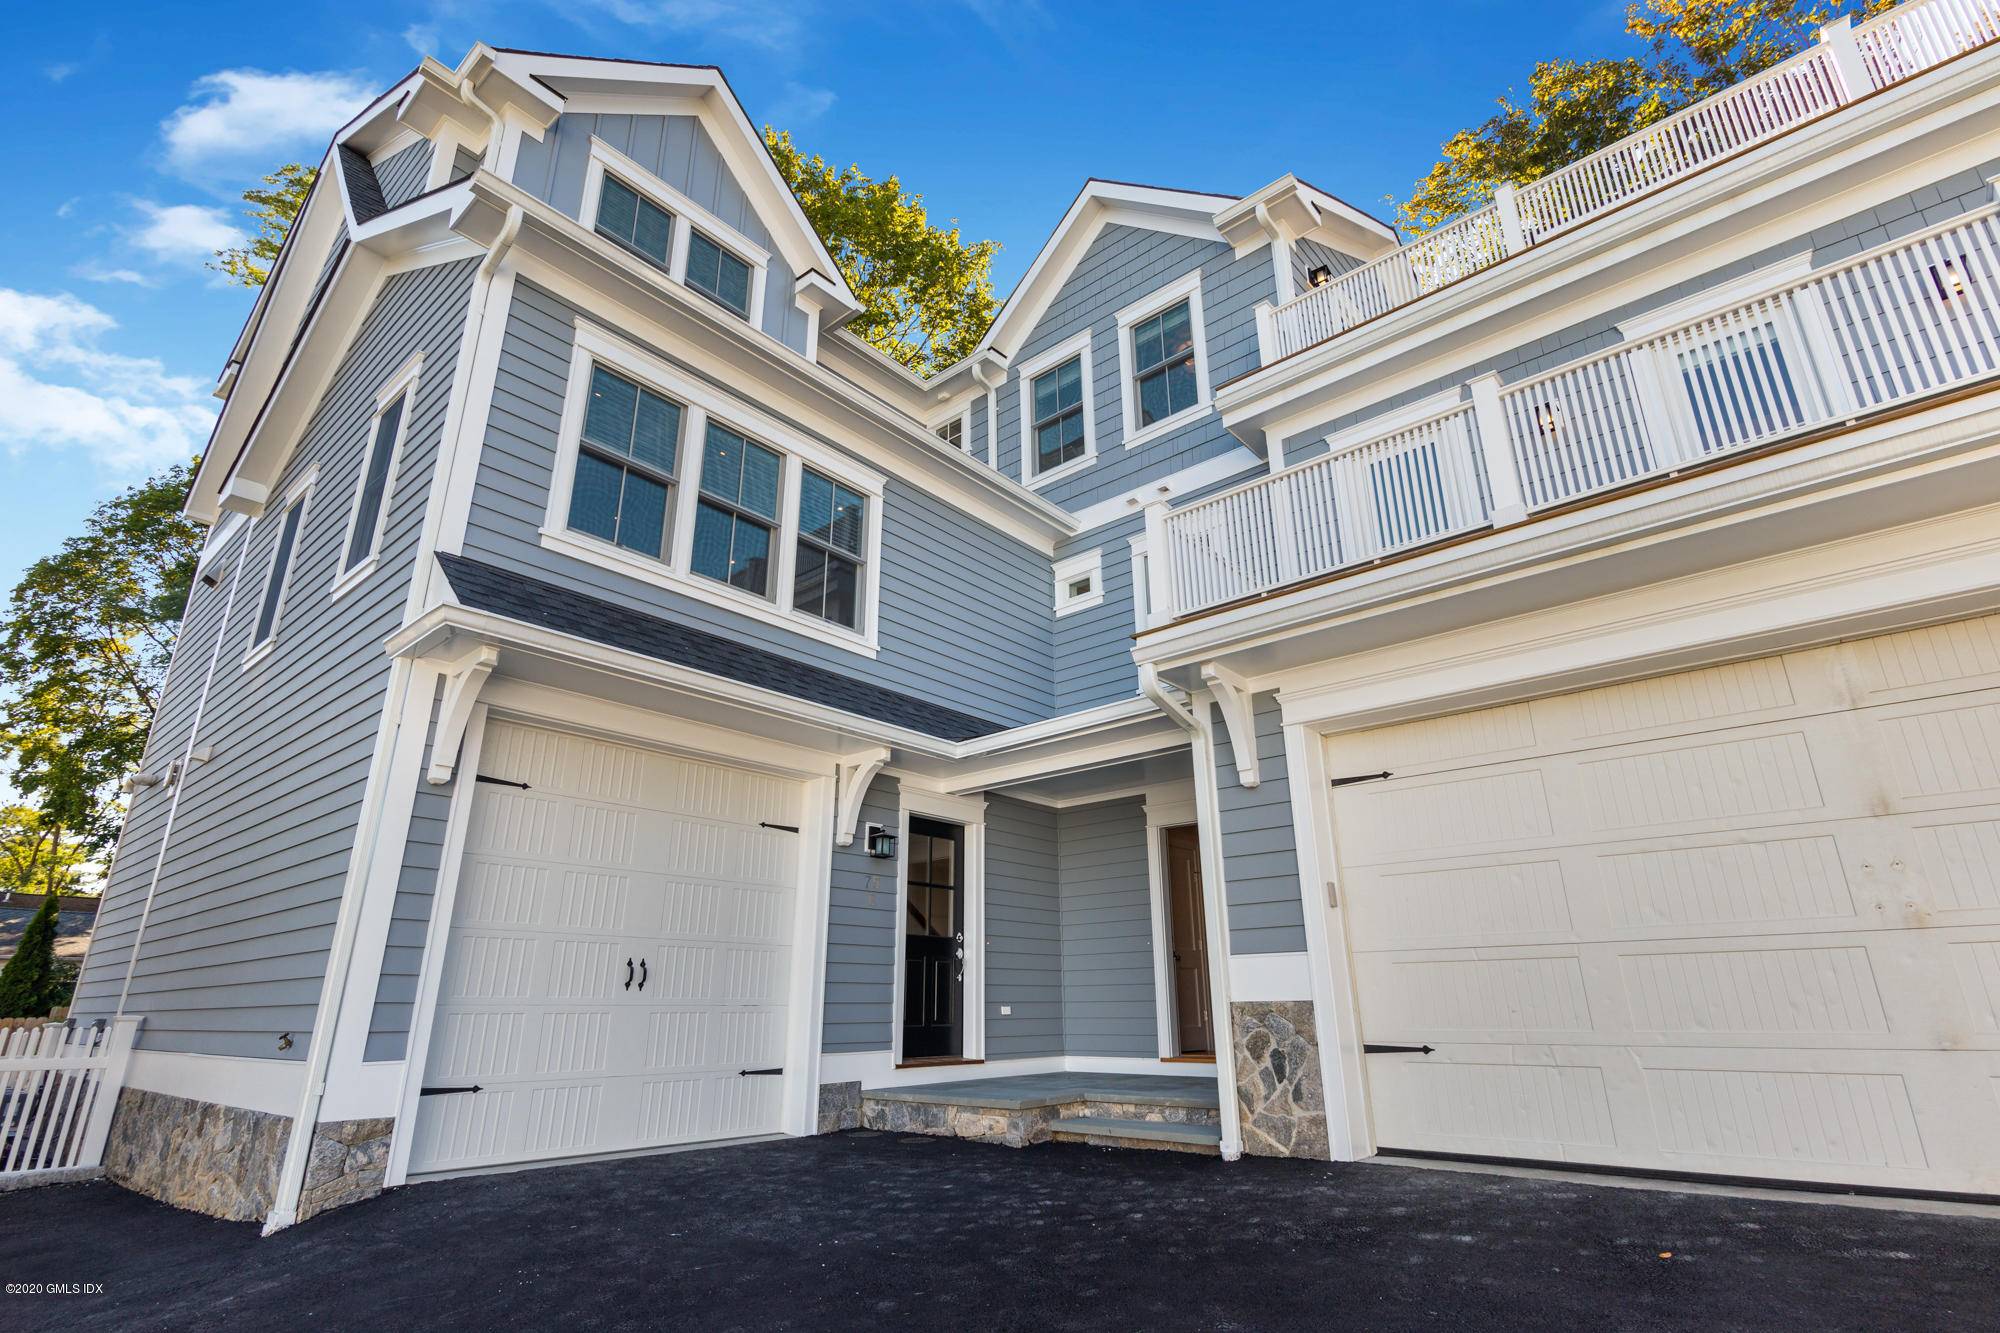 Brand new 3 bed 4 Bath townhome in the heart of Cos Cob, walk to Train, downtown, coffee shops, restaurants and more.